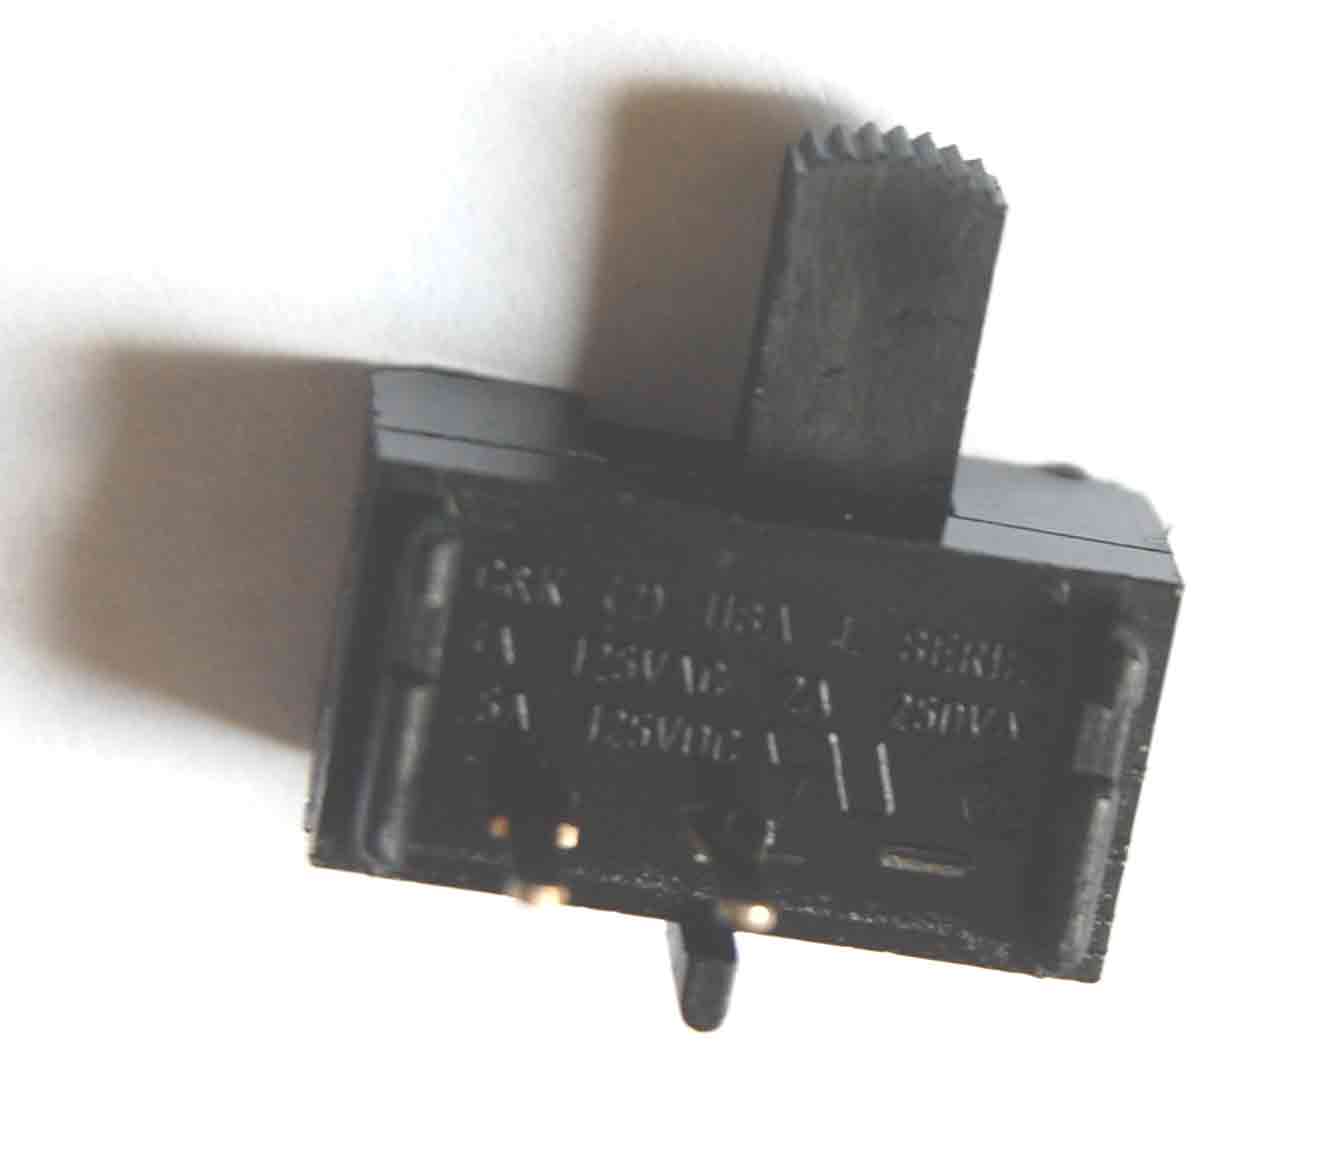 [black 2 pin switch - 
click for larger version]